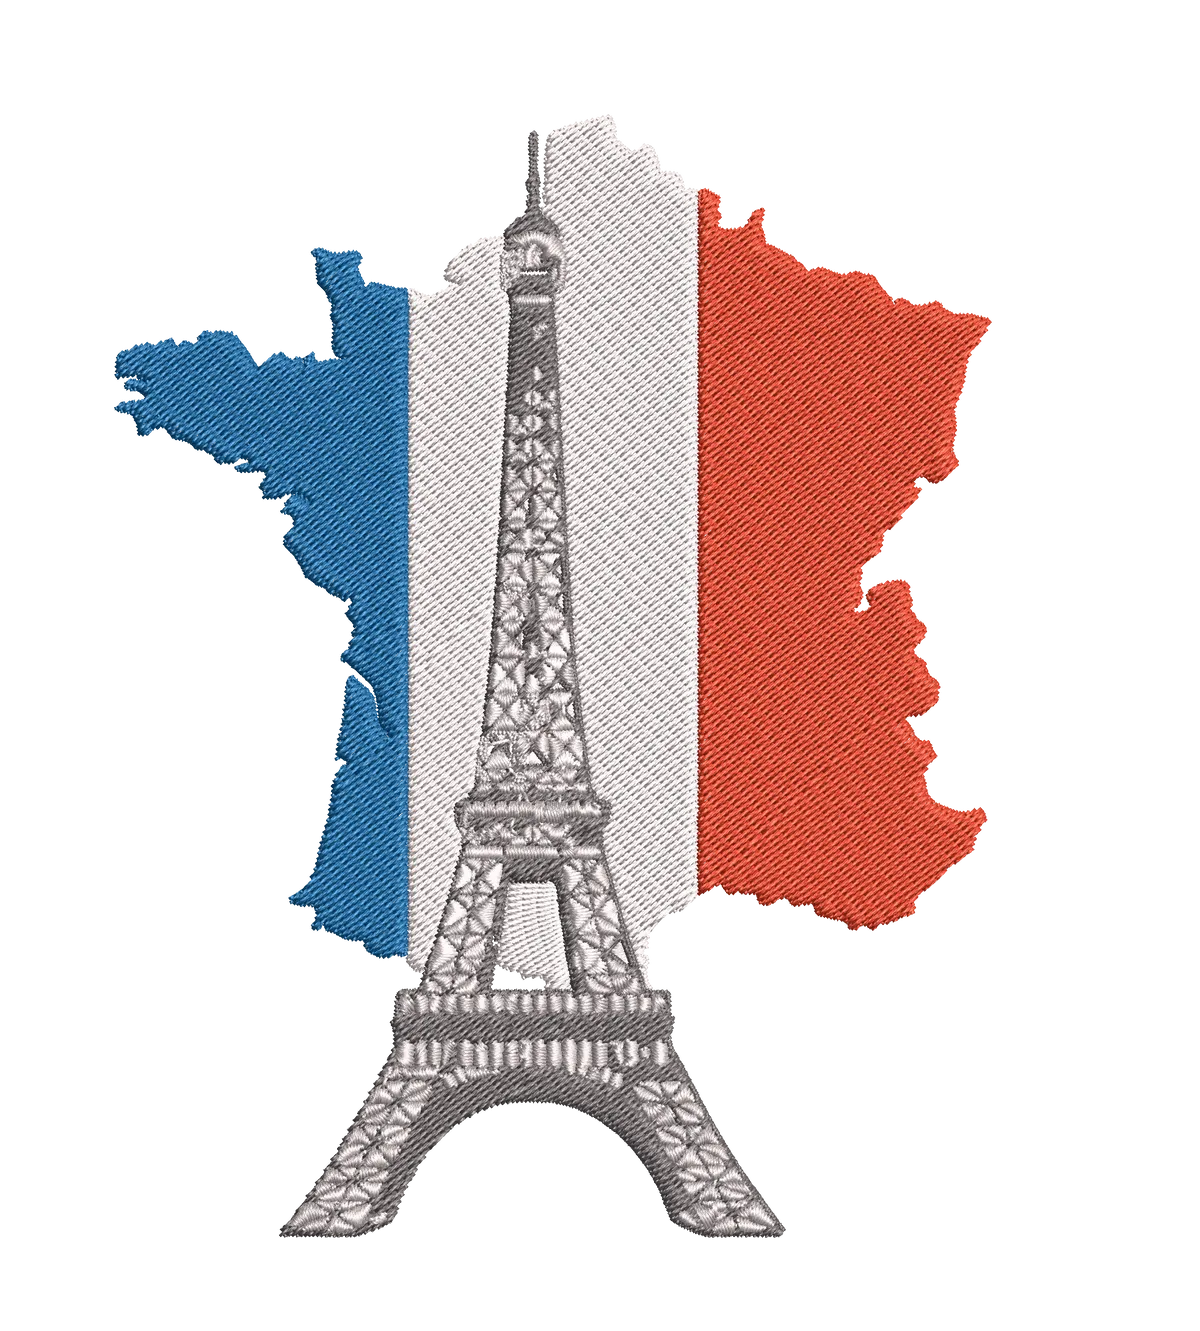 Paris Eiffel Tower Embroidery Design - Three Sizes, French Tricolor Map, and Iconic Landmark - Embroidery Designs FineryEmbroidery